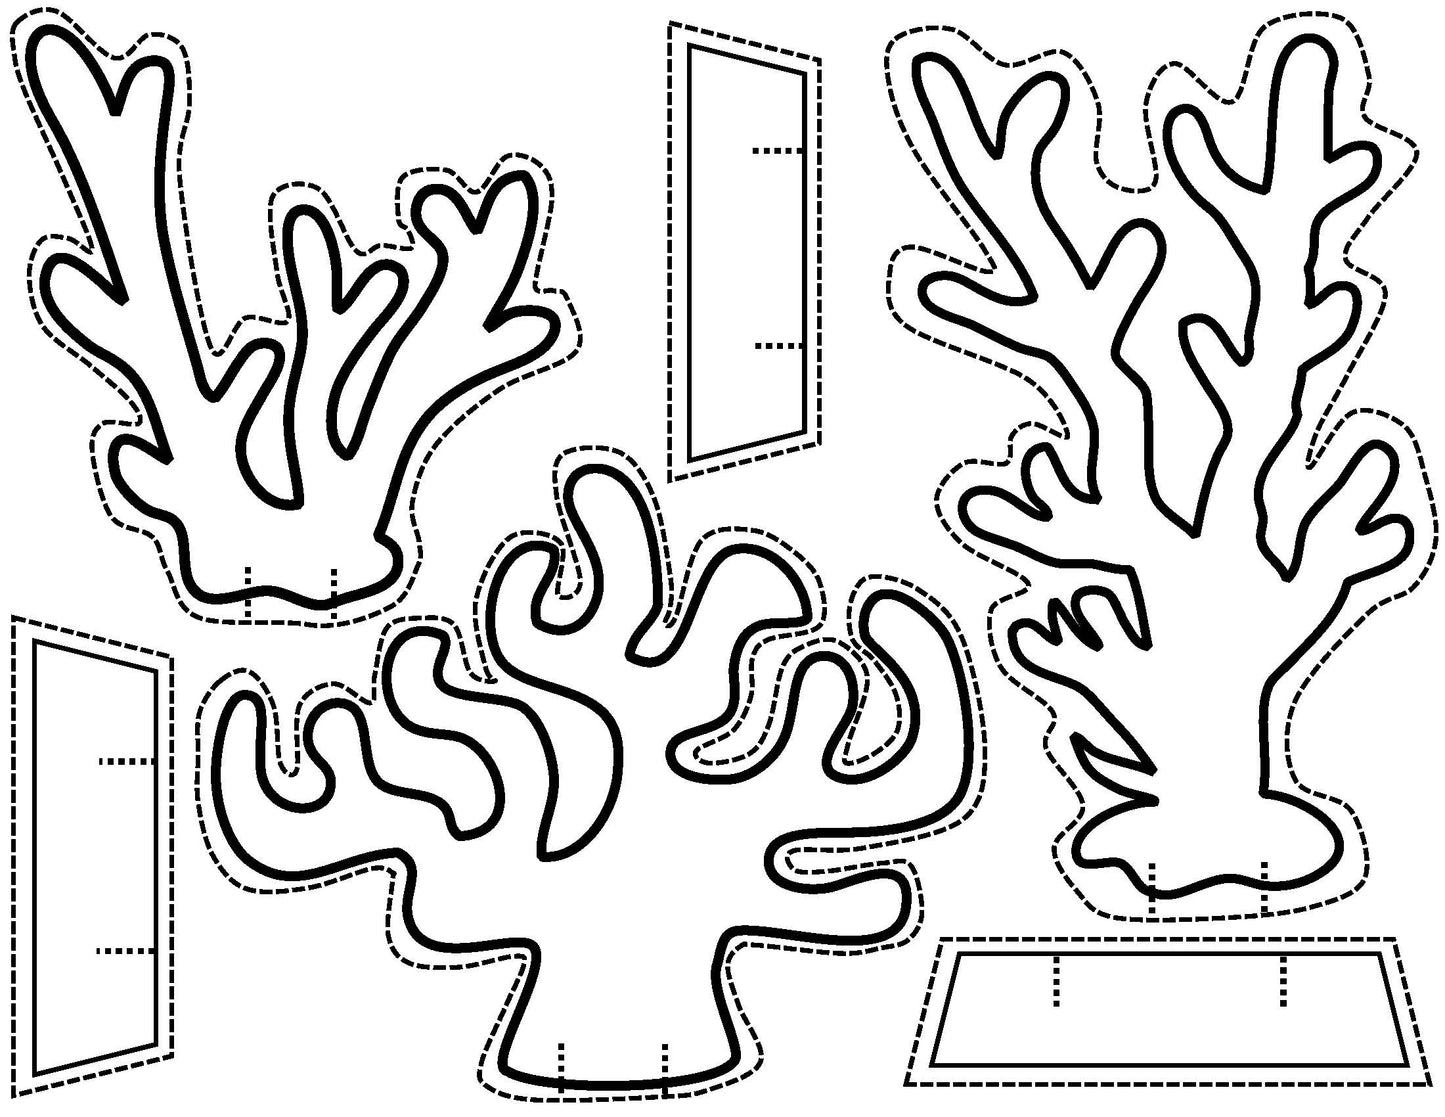 Paper stand-up coral reef art activity 